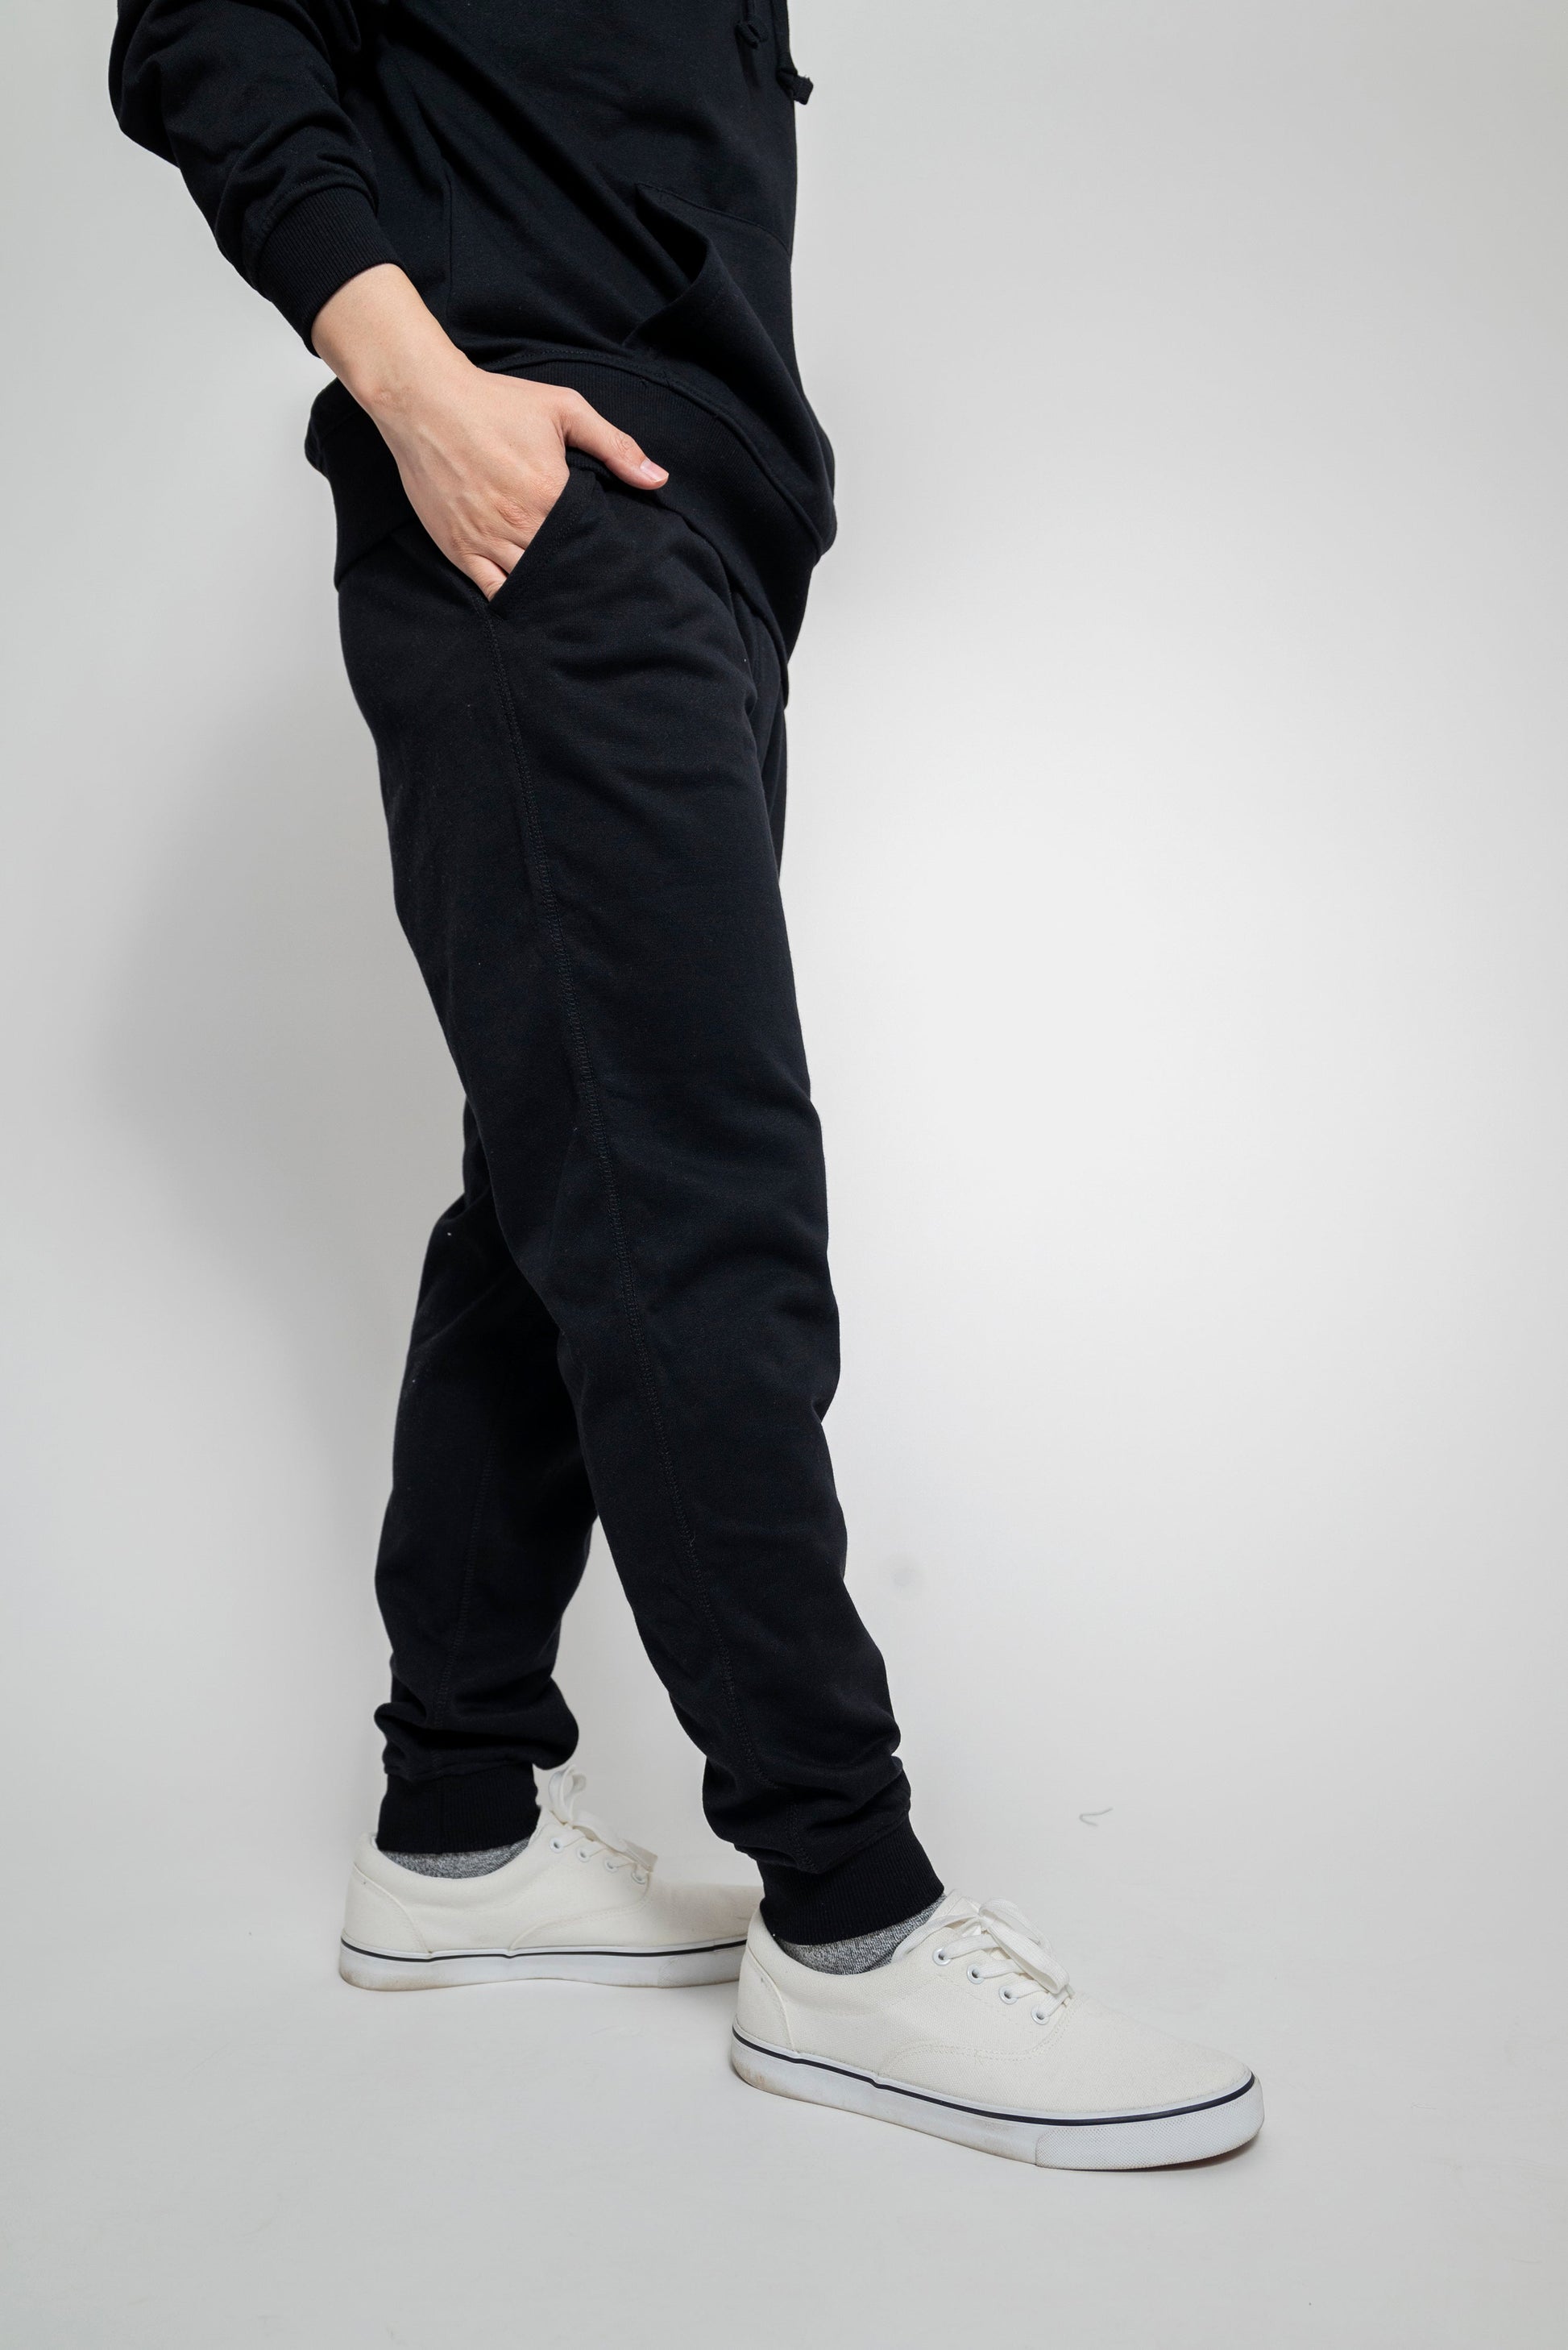 Gertex Adult Unisex French Terry Pants